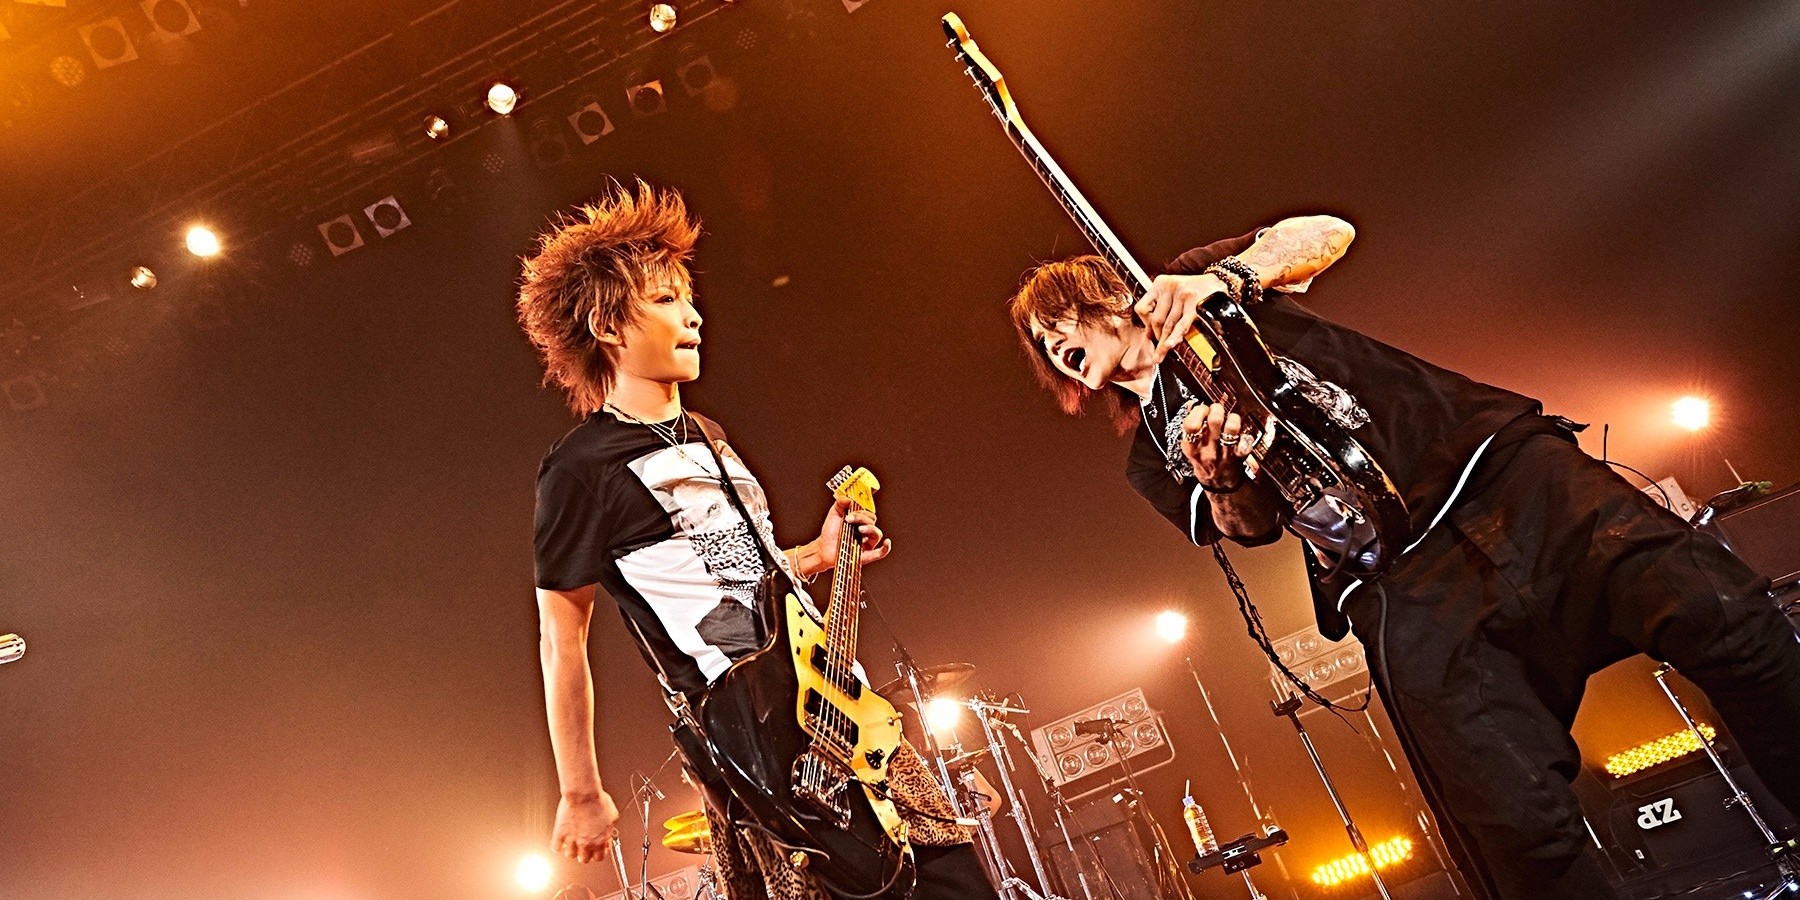 Sugizo takes on Inoran as LUNA SEA's guitar gods engage in a battle of